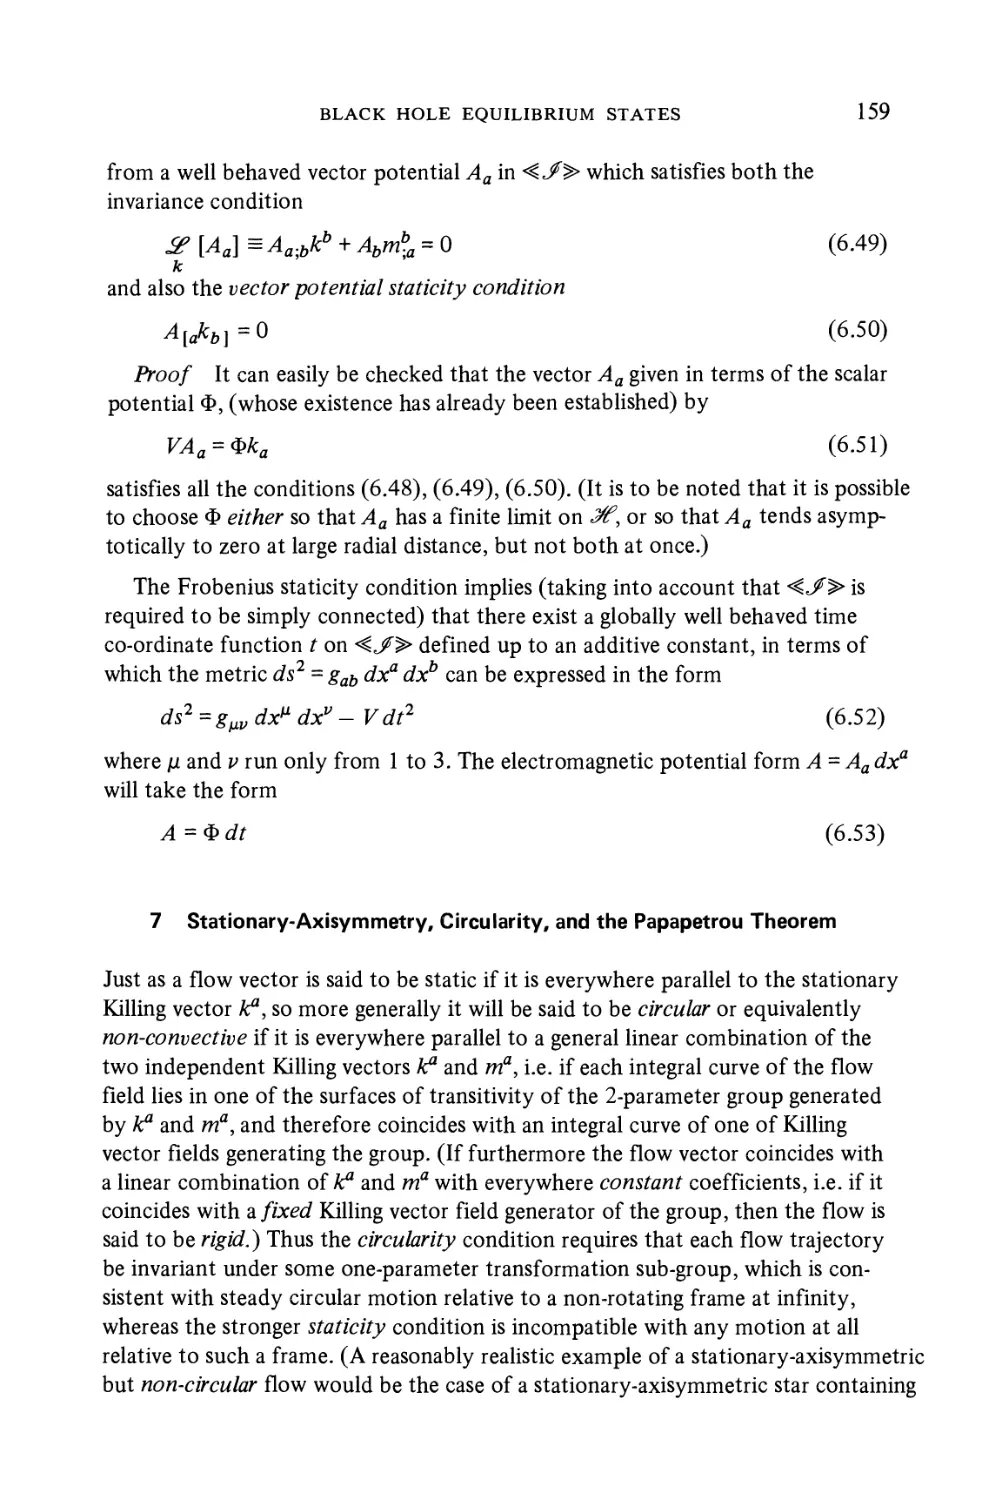 7 Stationary-Axisymmetry, Circularity, and the Papapetrou Theorem